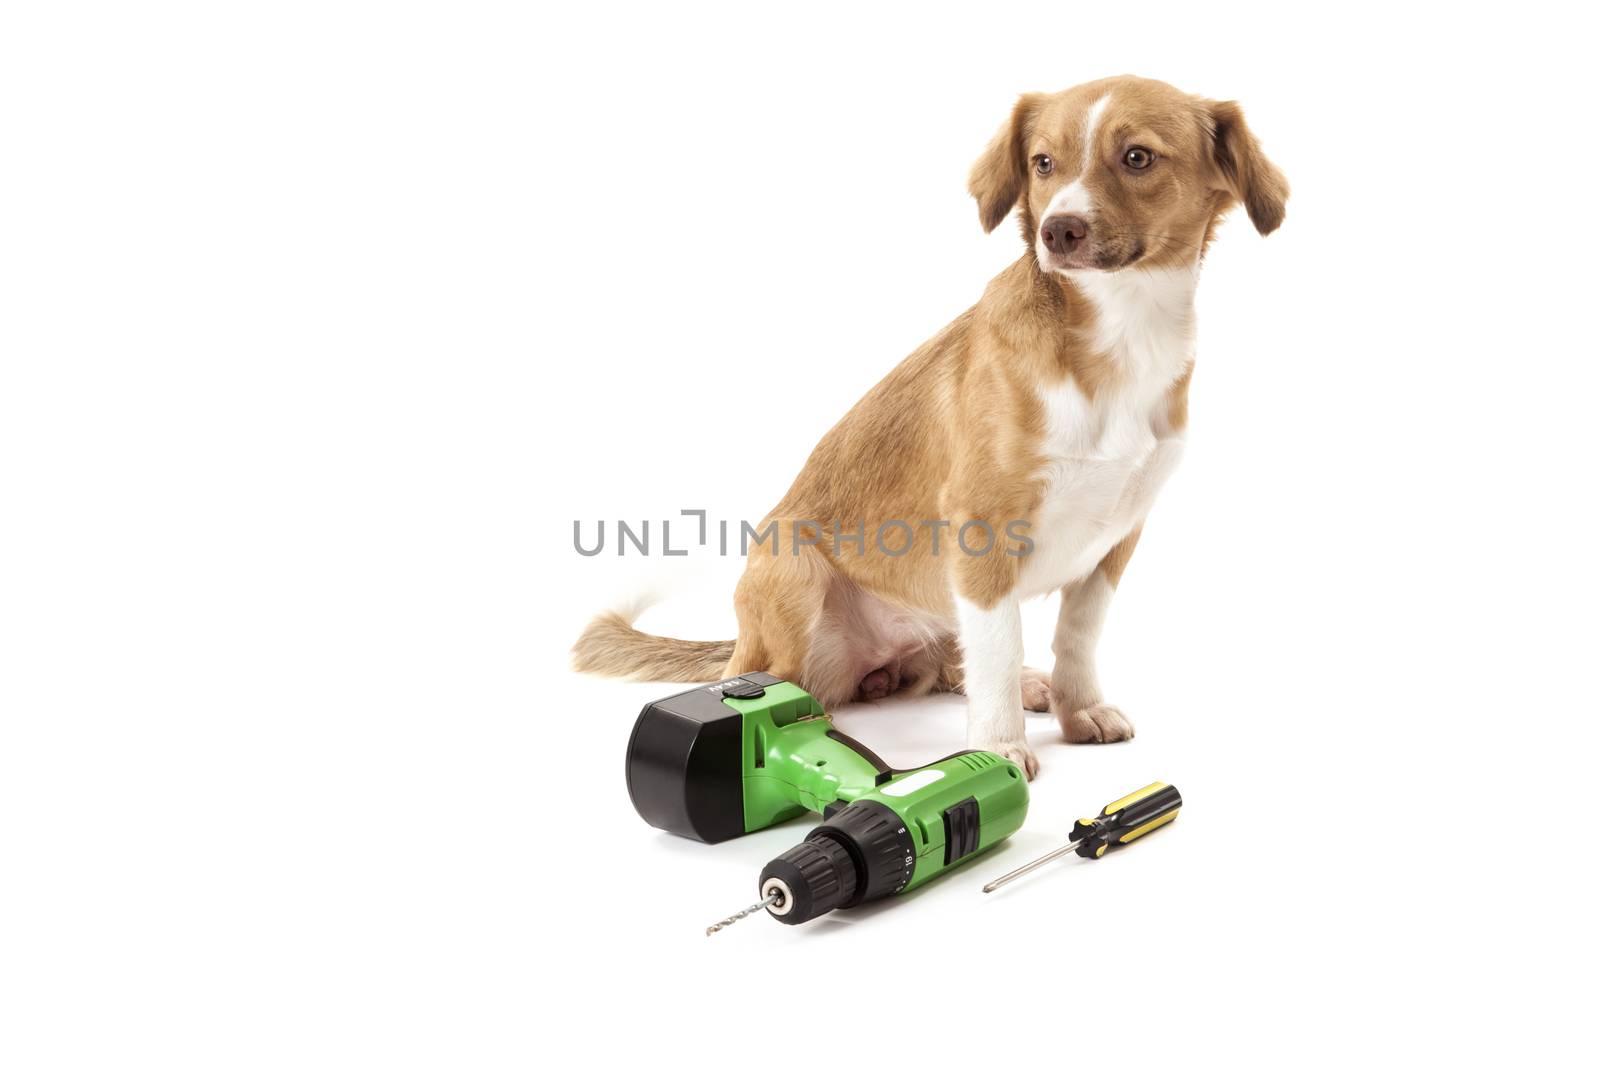 Portrait of dog with drill and screwdriver by Aarstudio